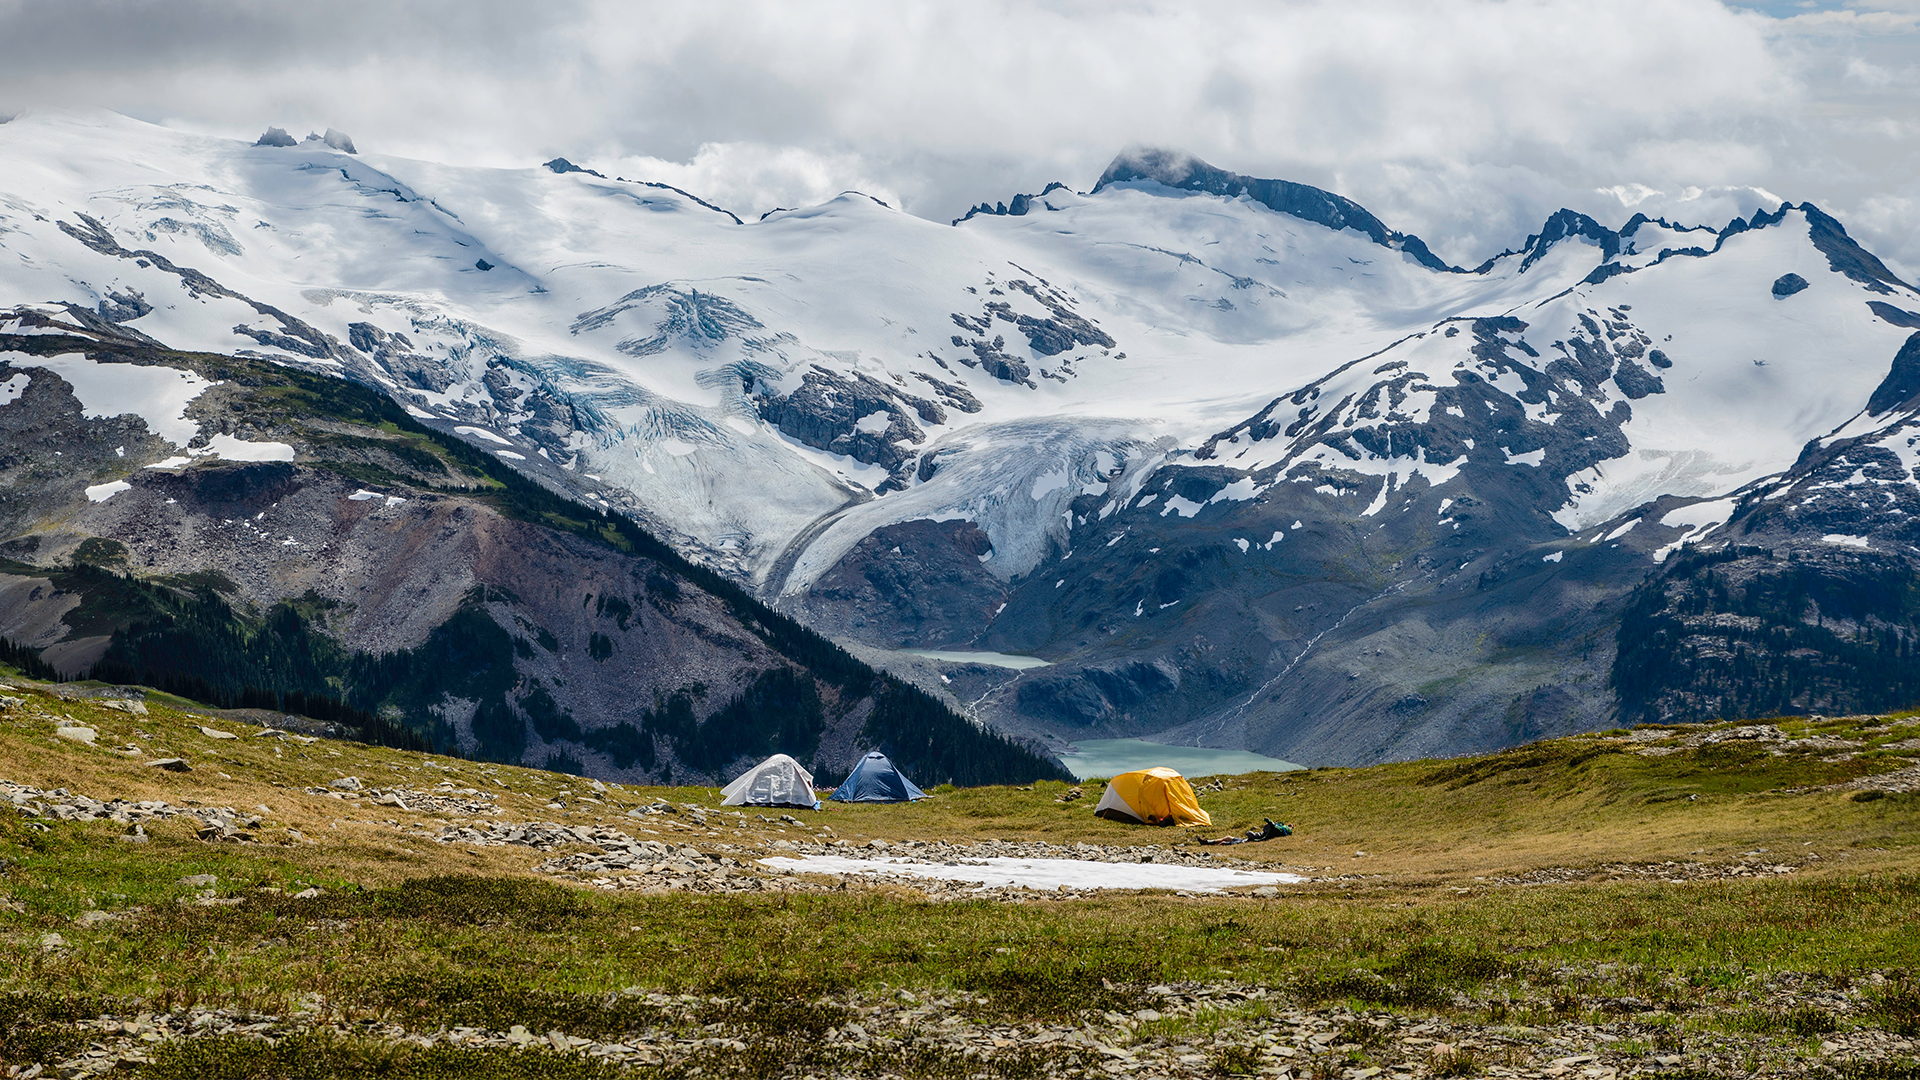 Snowy capped ridges in the background, three pitched tents on grass in the foreground